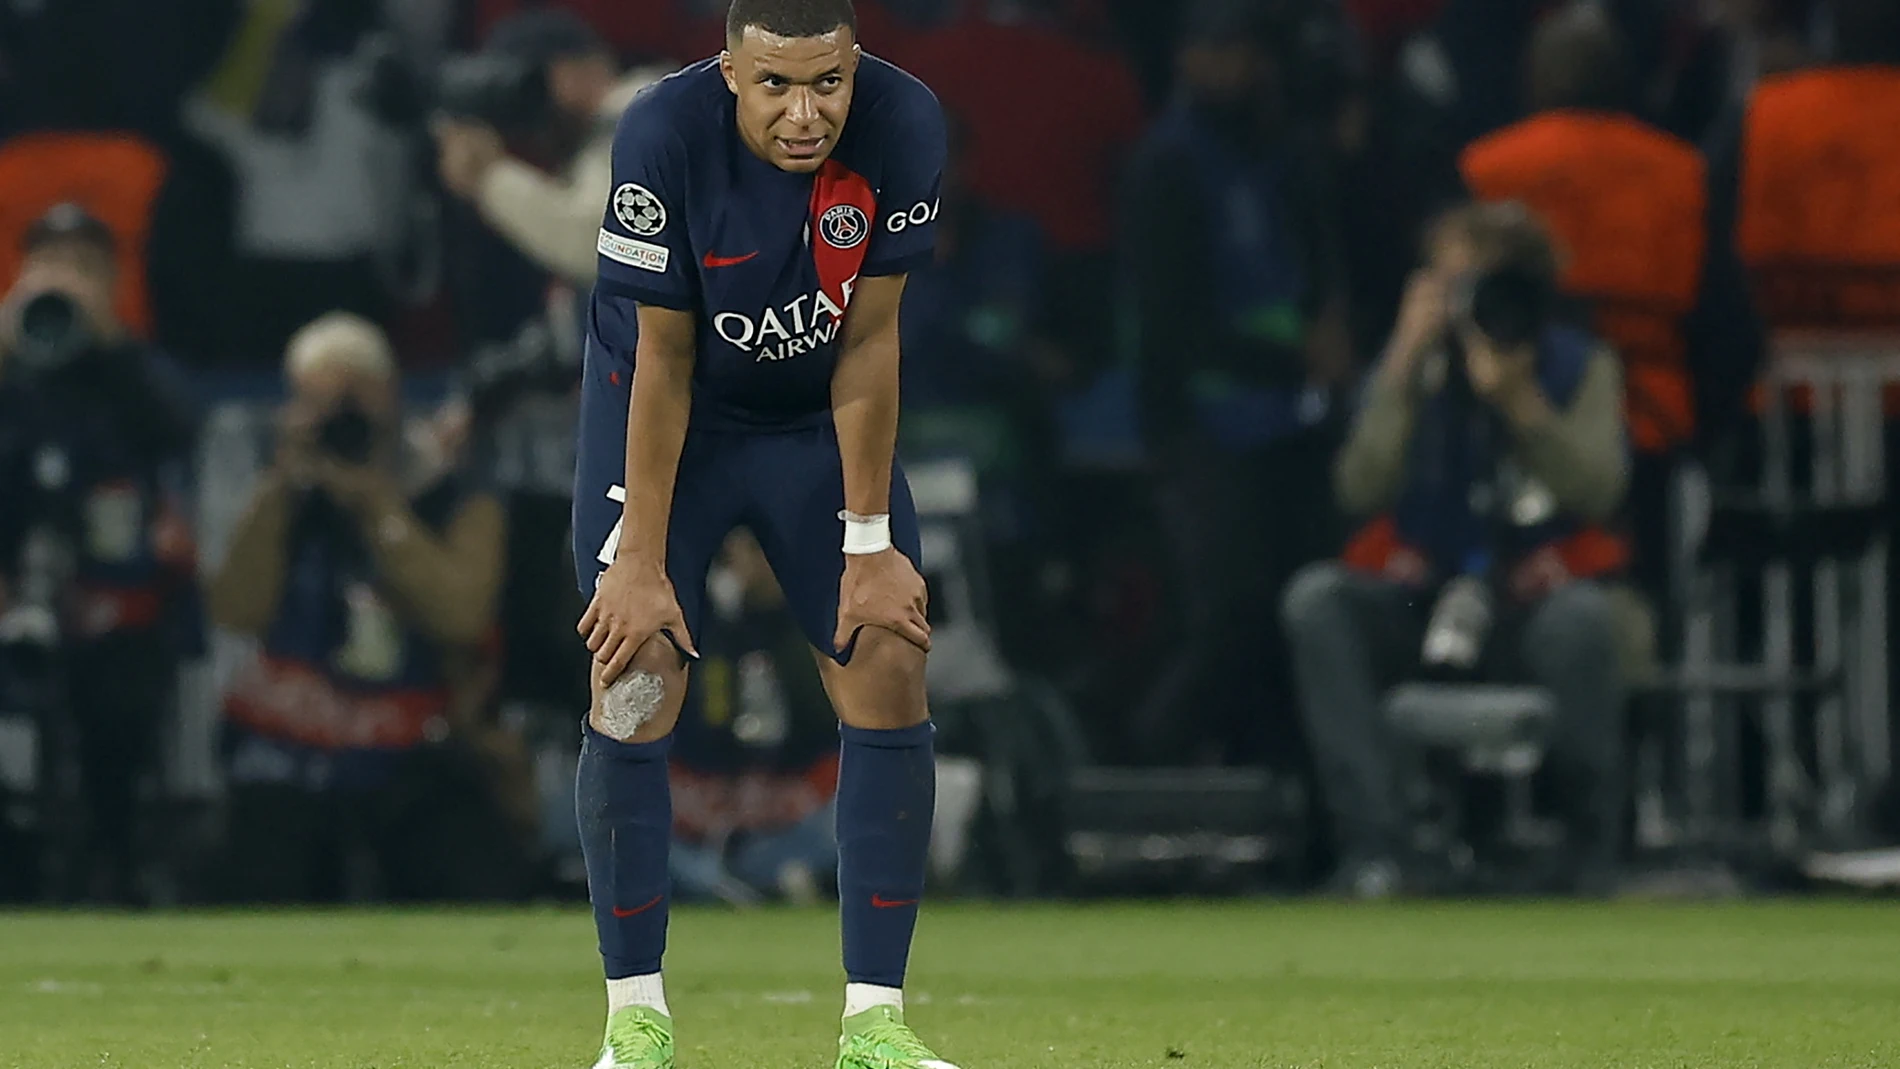 Paris (France), 07/05/2024.- Kylian Mbappe of PSG reacts at the final whistle of the UEFA Champions League semi-finals, 2nd leg soccer match of Paris Saint-Germain against Borussia Dortmund, in Paris, France, 07 May 2024. PSG lost the match 0-1 and the tie 0-2 on aggregate with Borussia Dortmund advancing to the final. (Liga de Campeones, Francia, Rusia) EFE/EPA/YOAN VALAT 